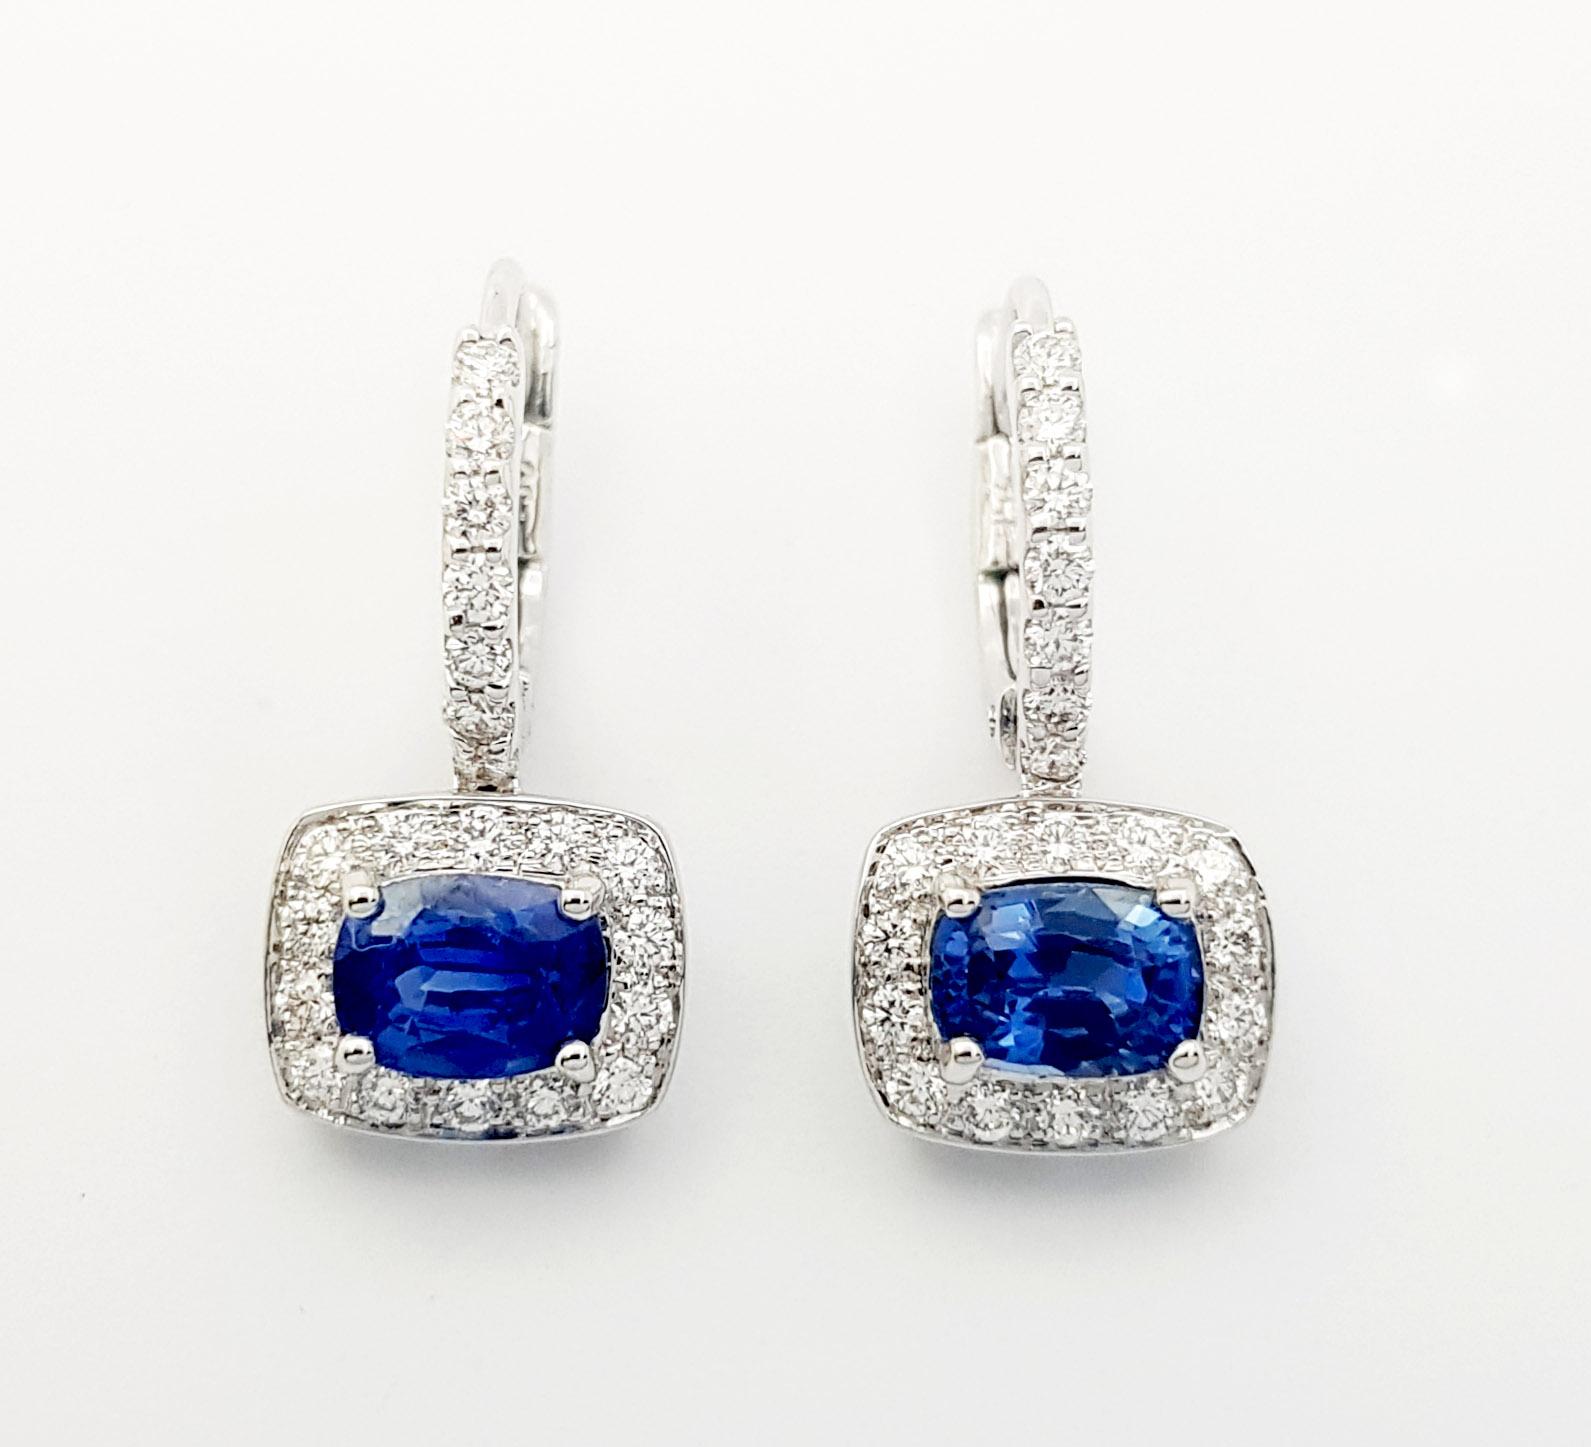 Blue Sapphire 1.88 carats with Diamond 0.56 carat Earrings set in 18K White Gold Settings

Width: 0.9 cm 
Length: 1.9 cm
Total Weight: 4.76 grams

